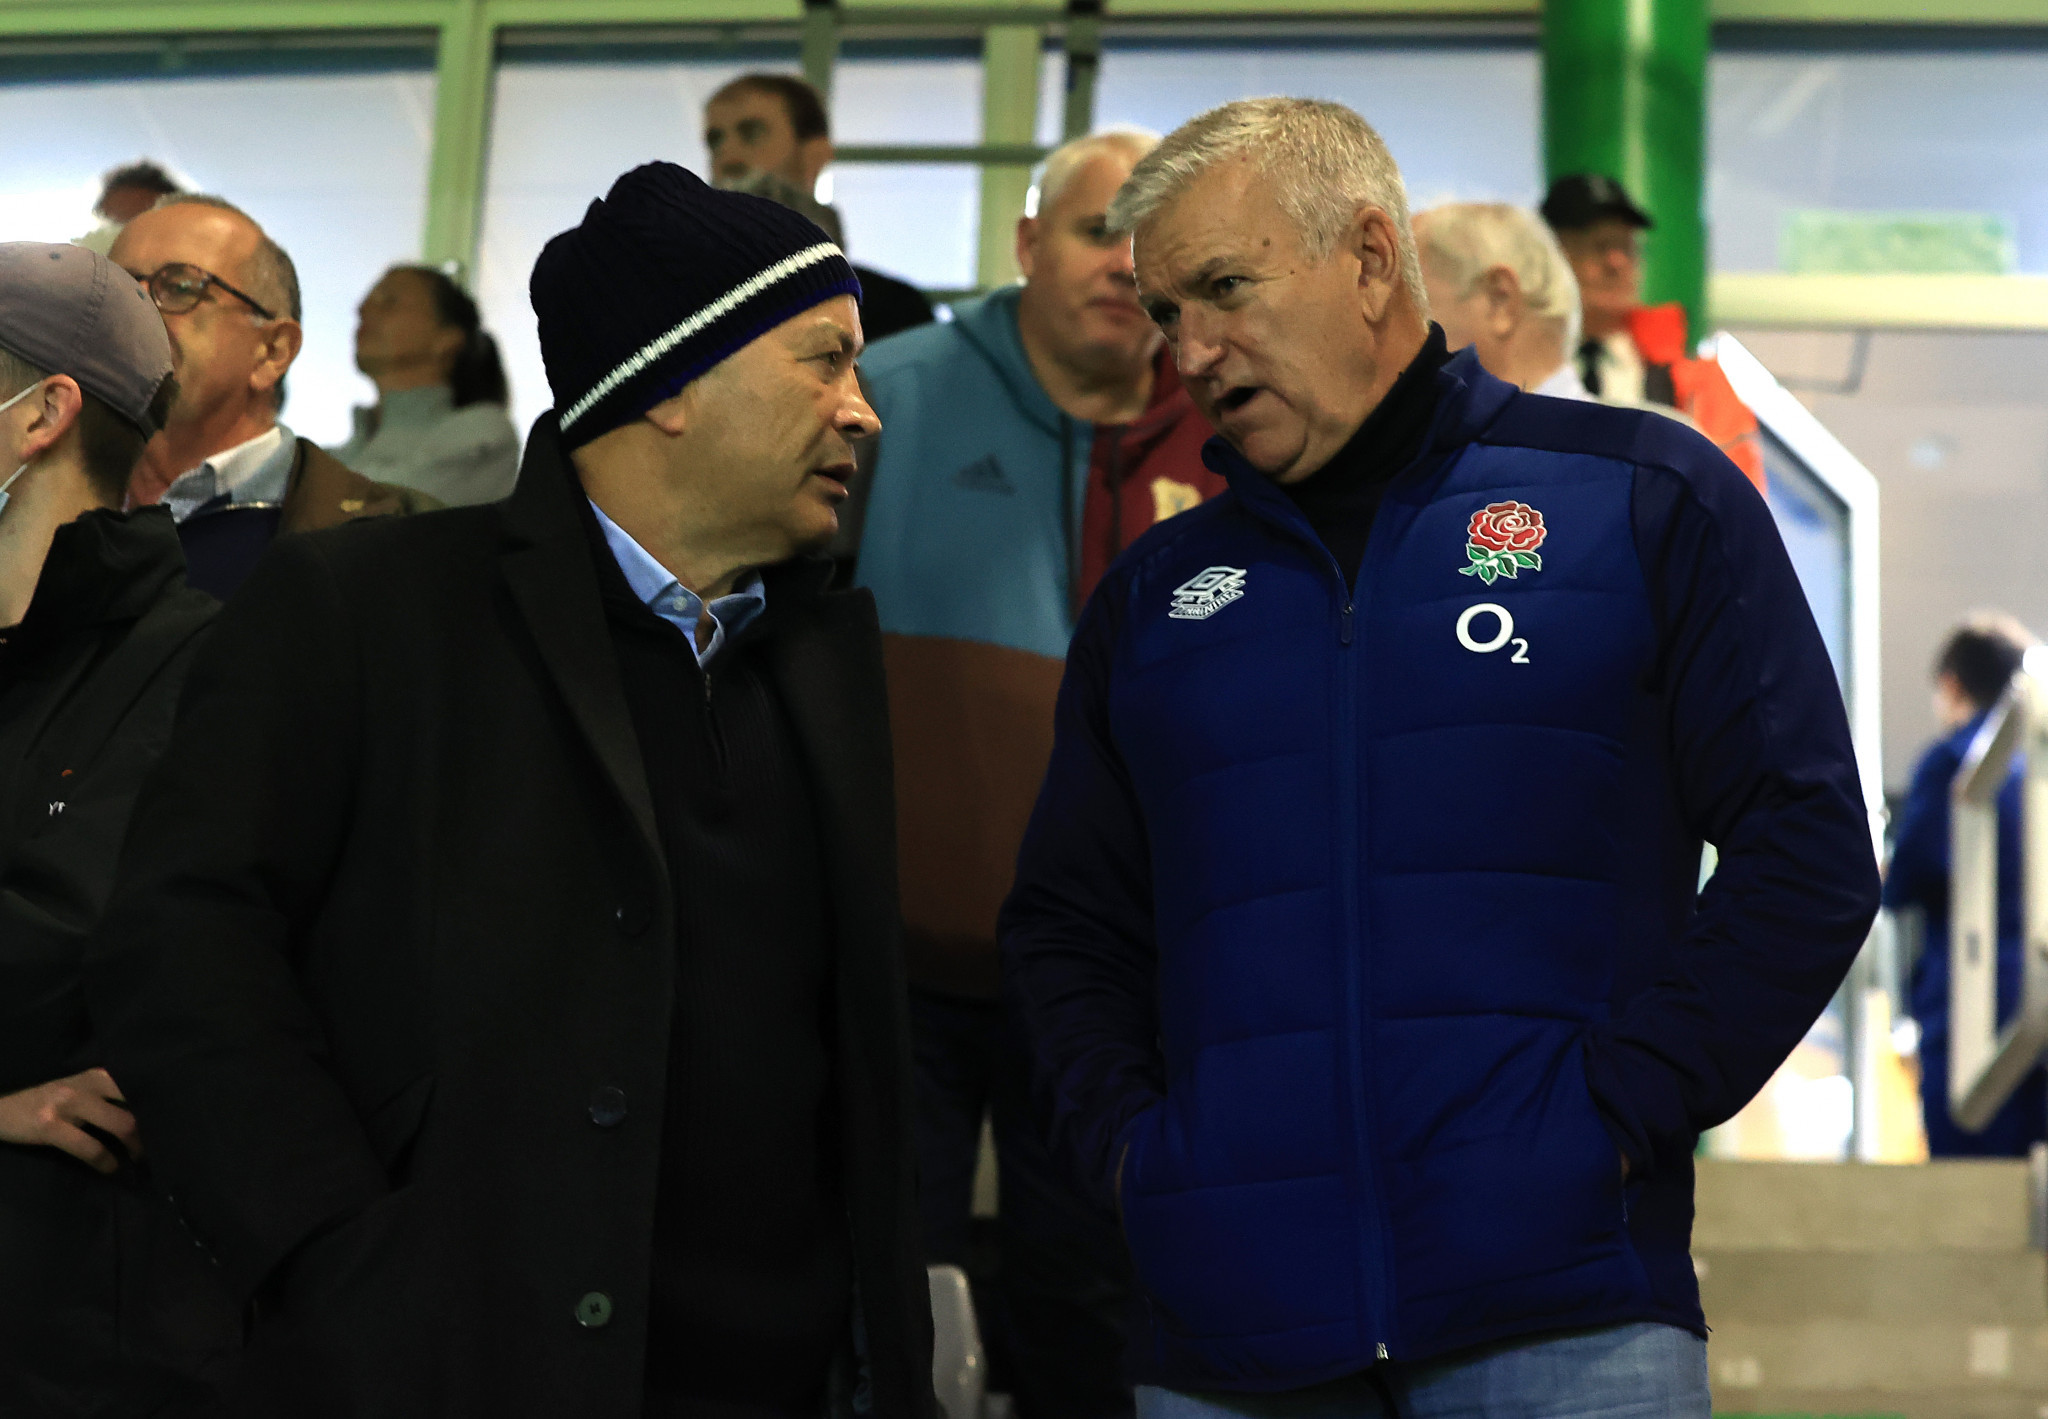 Bill Sweeney, right, joined the RFU in 2019 ©Getty Images